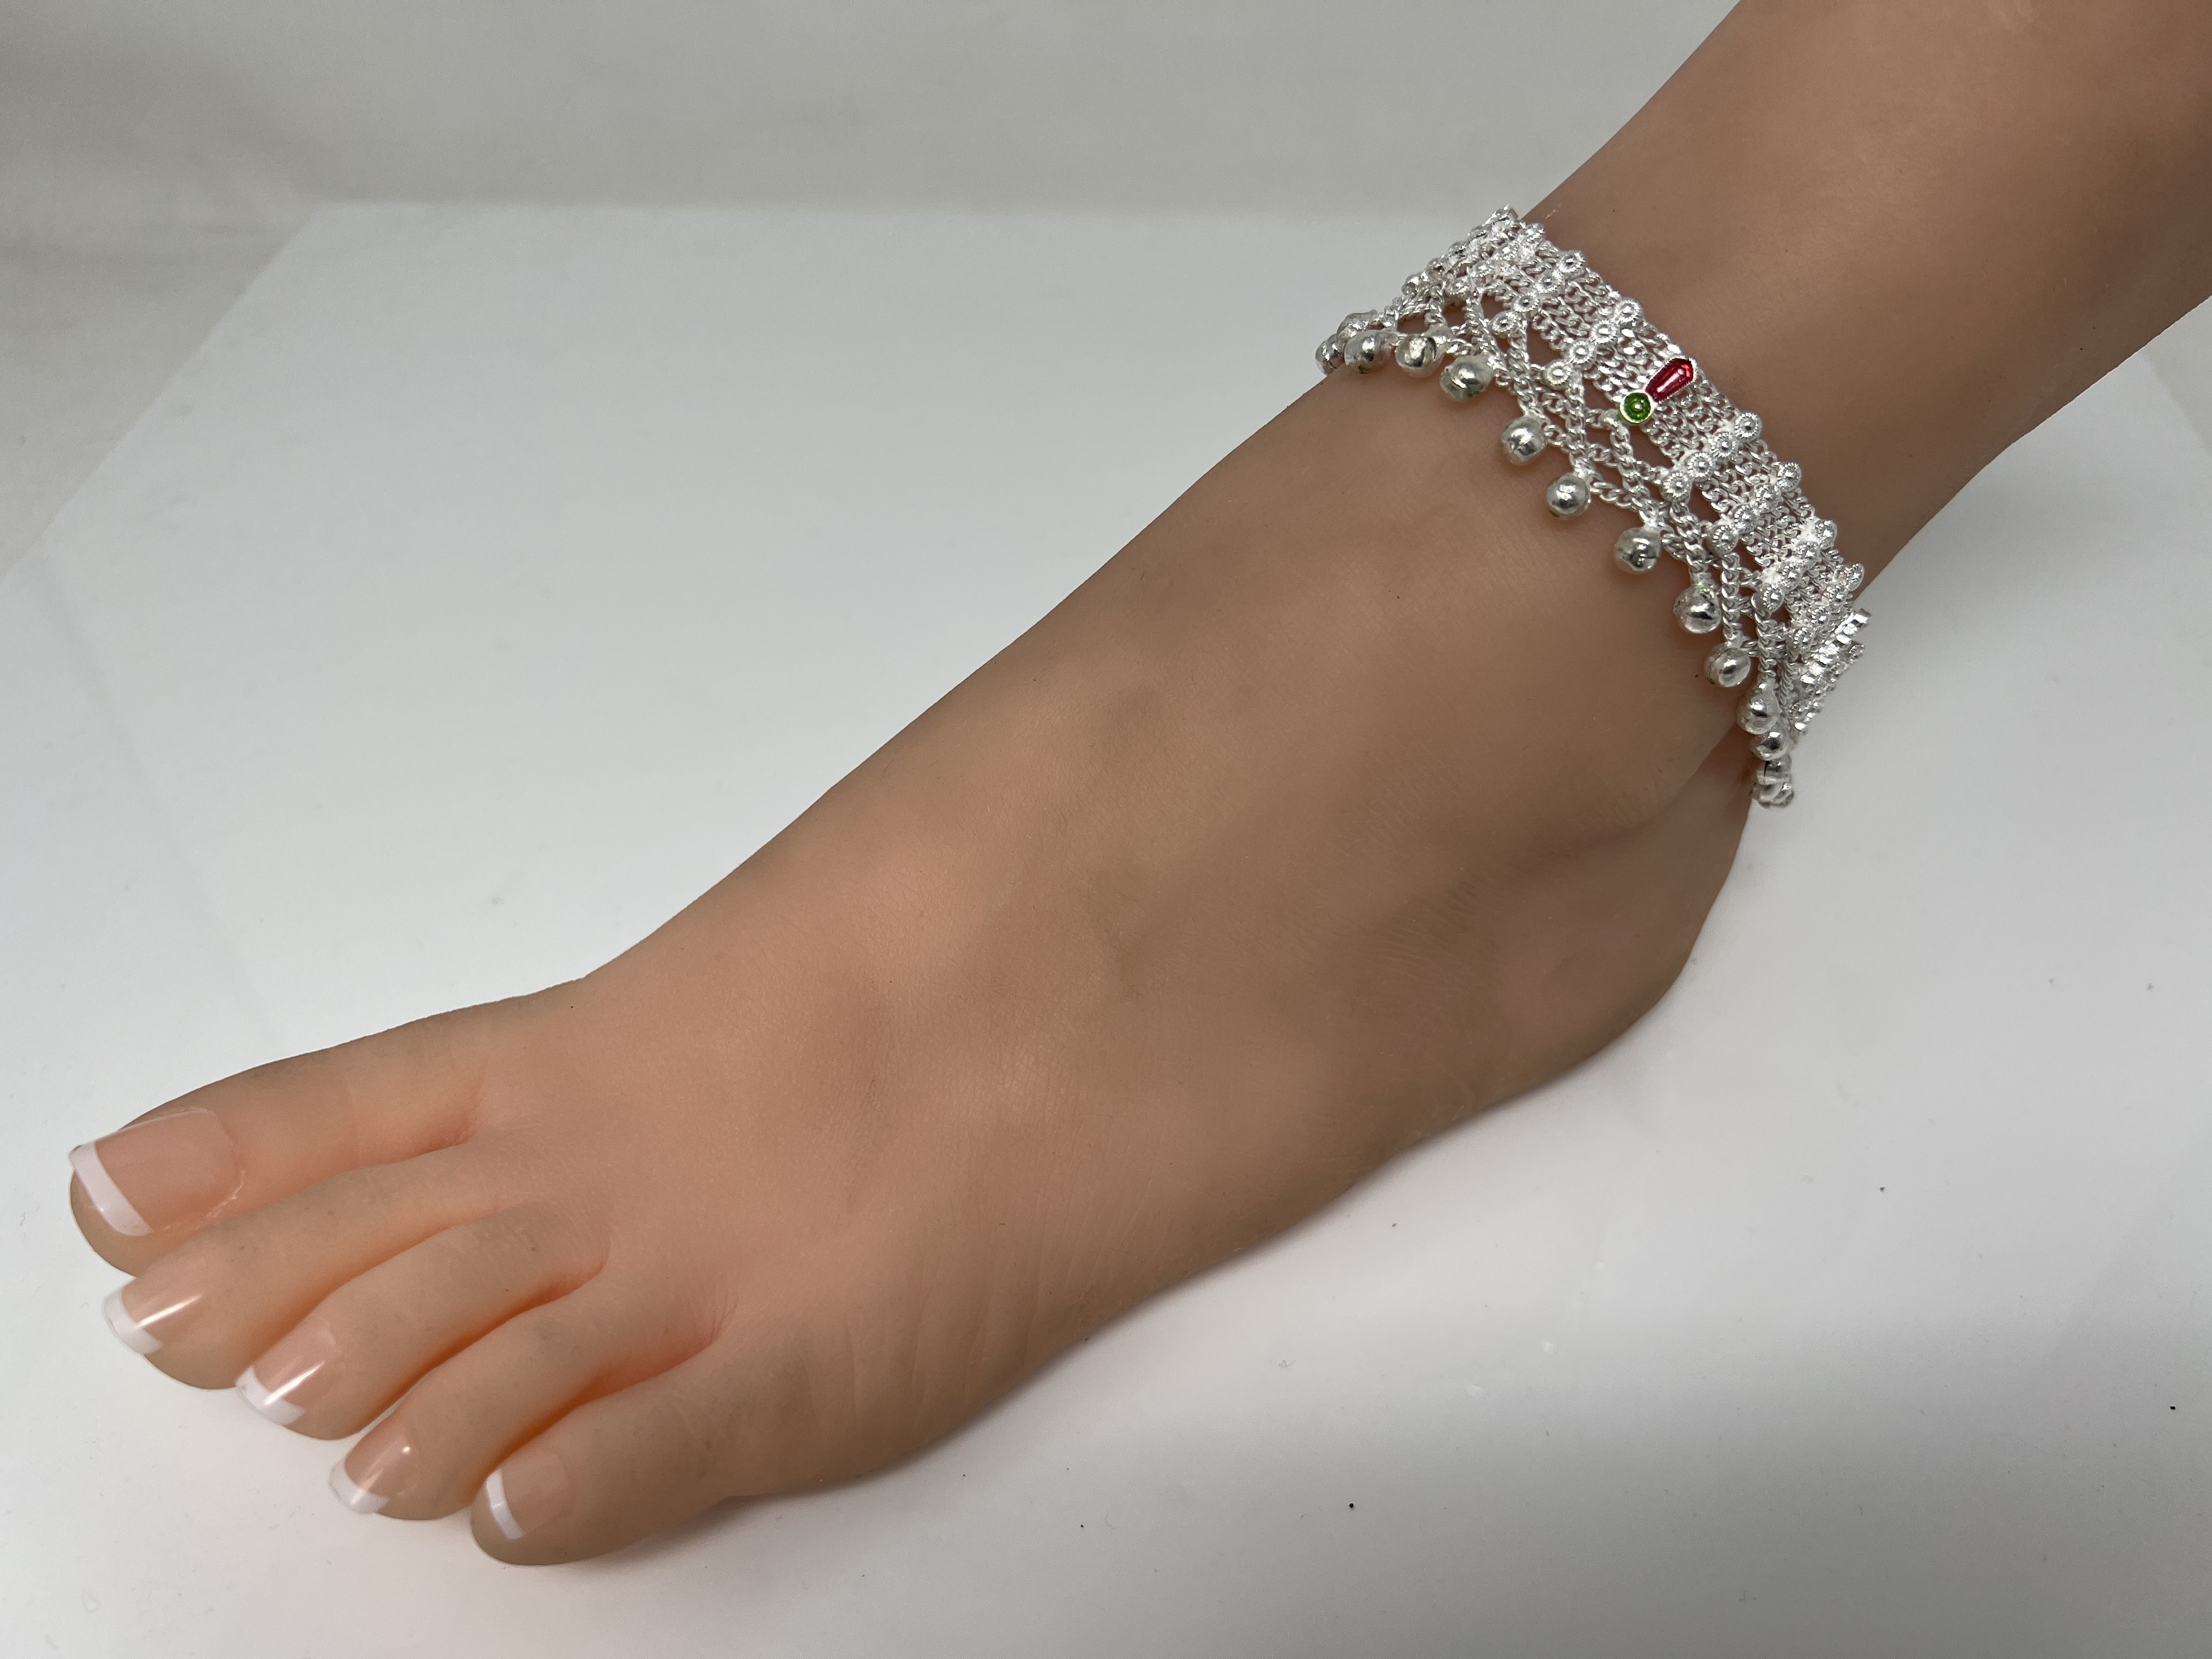 A12 Pair of Anklets Payal with Rhinestones and meenakari for Legs